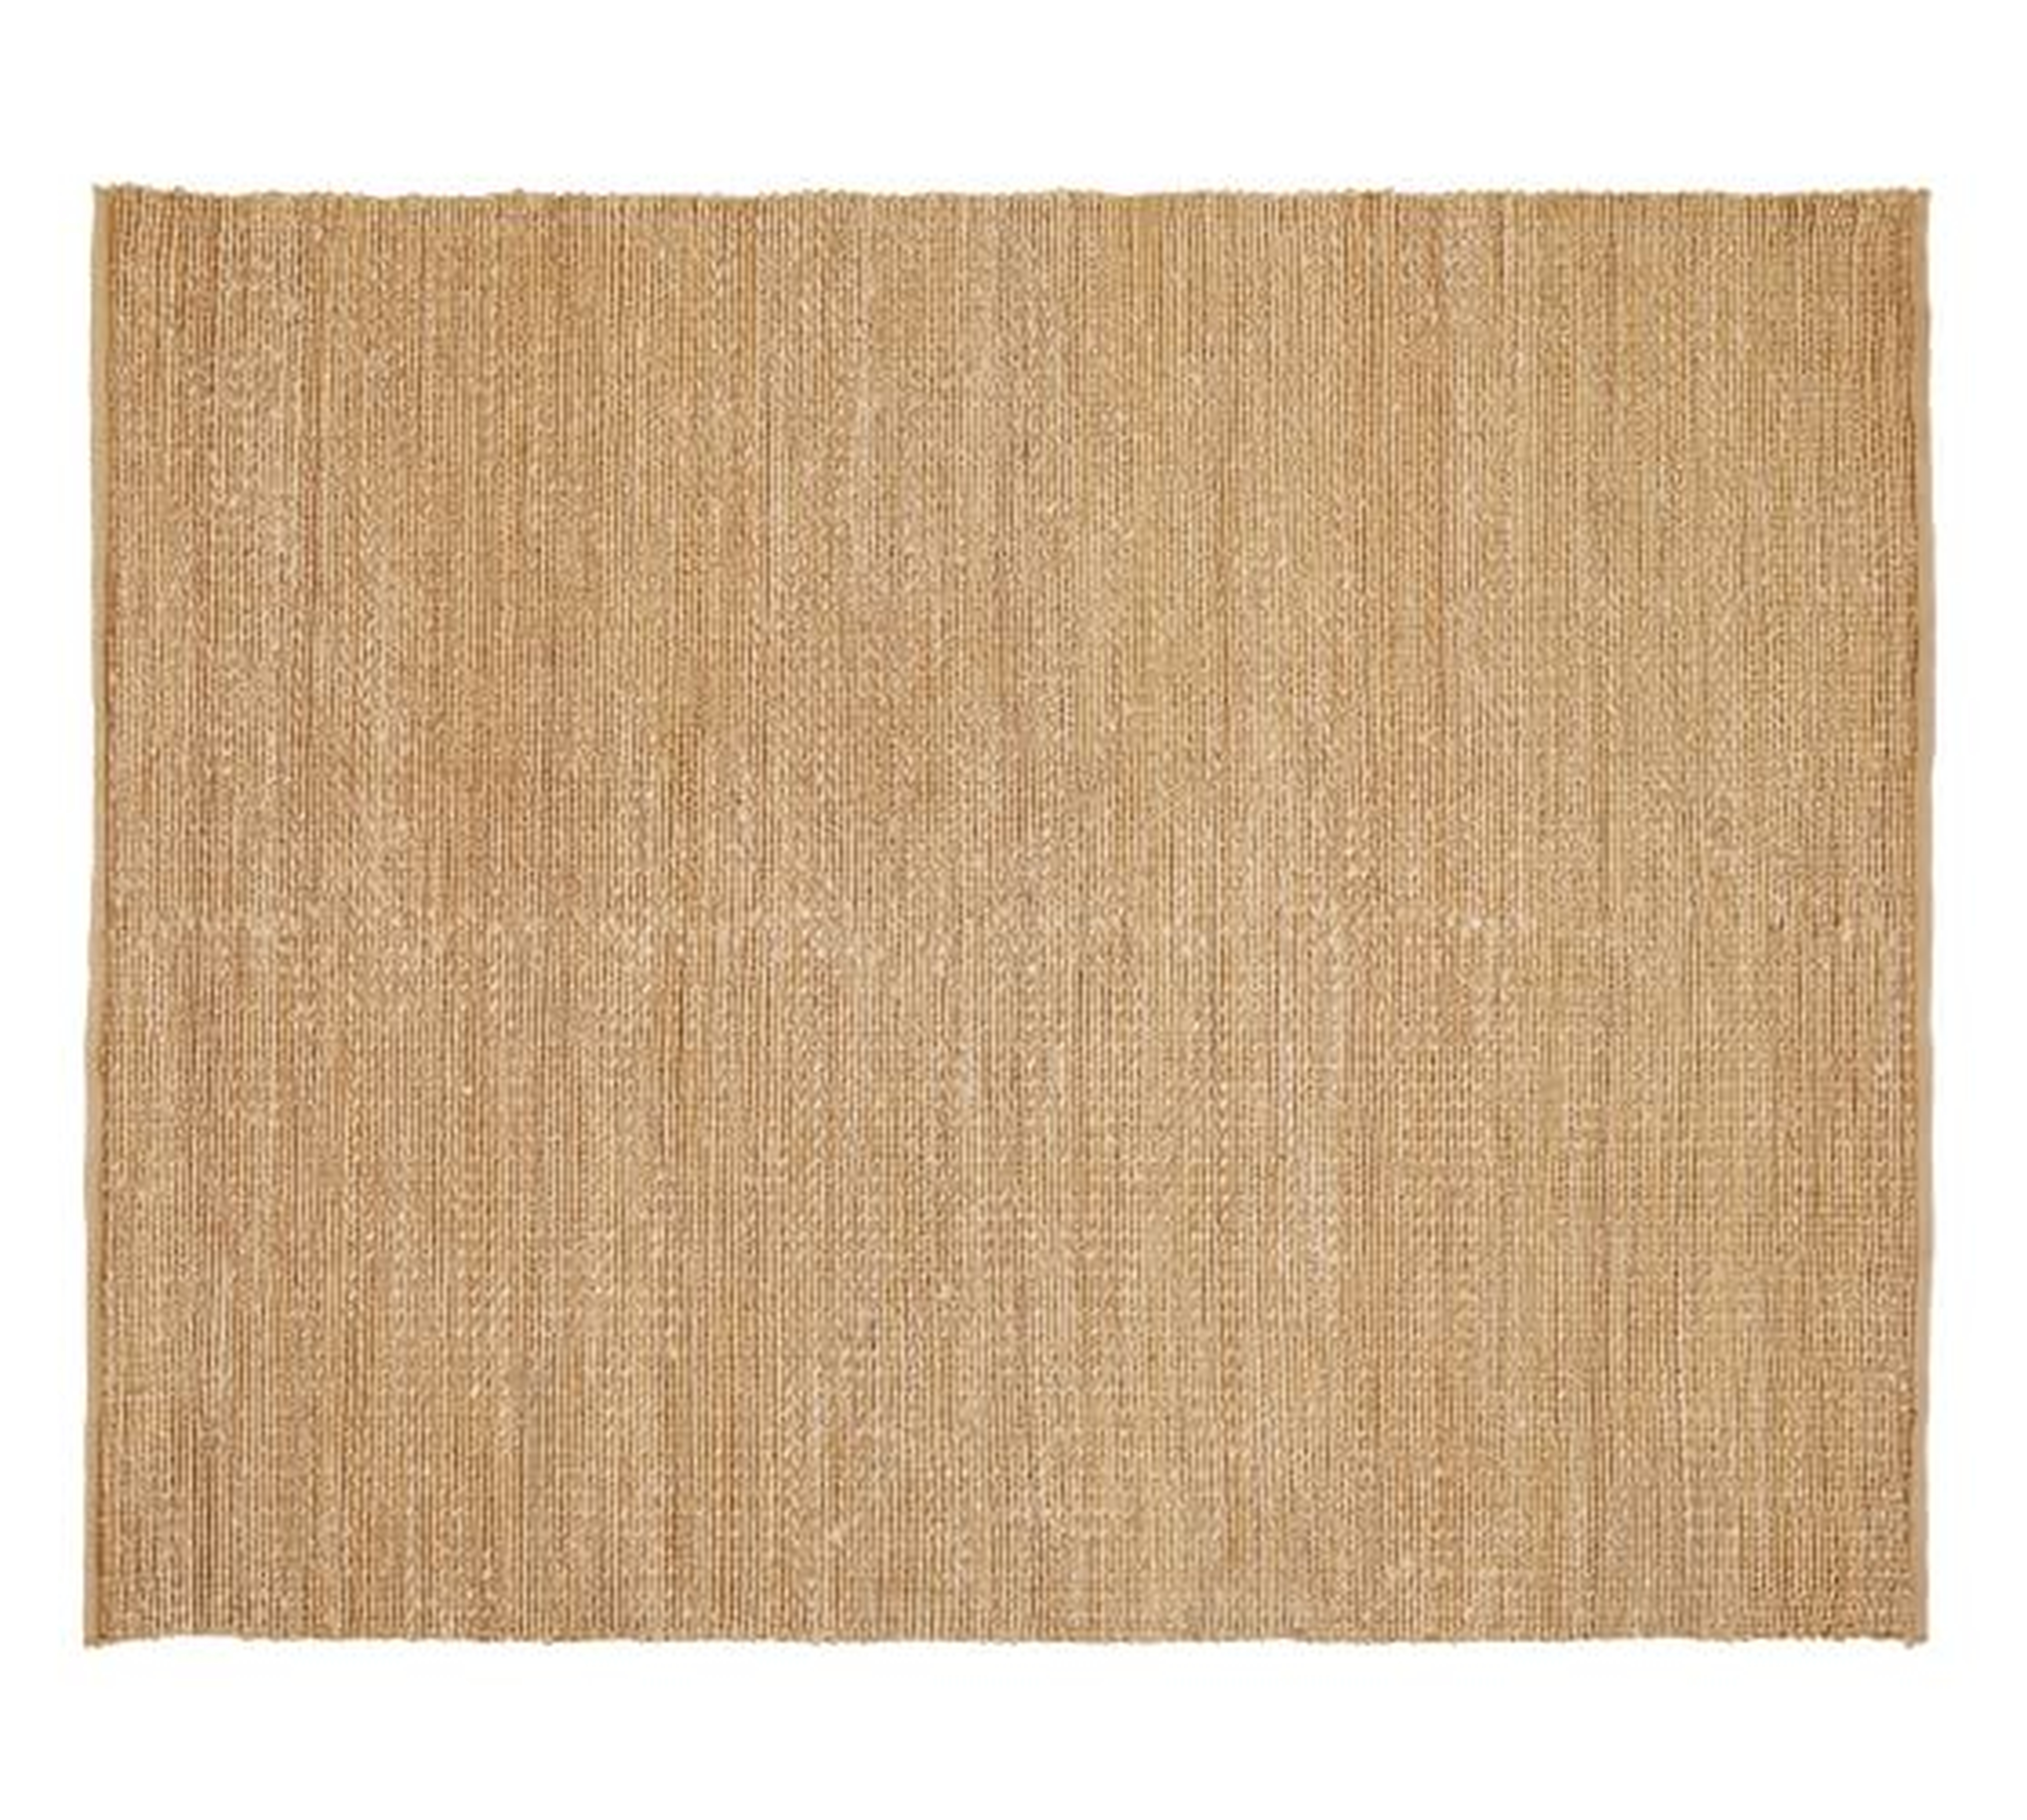 Heather Chenille Jute Rug,NATURAL, 9 x 12' - Pottery Barn